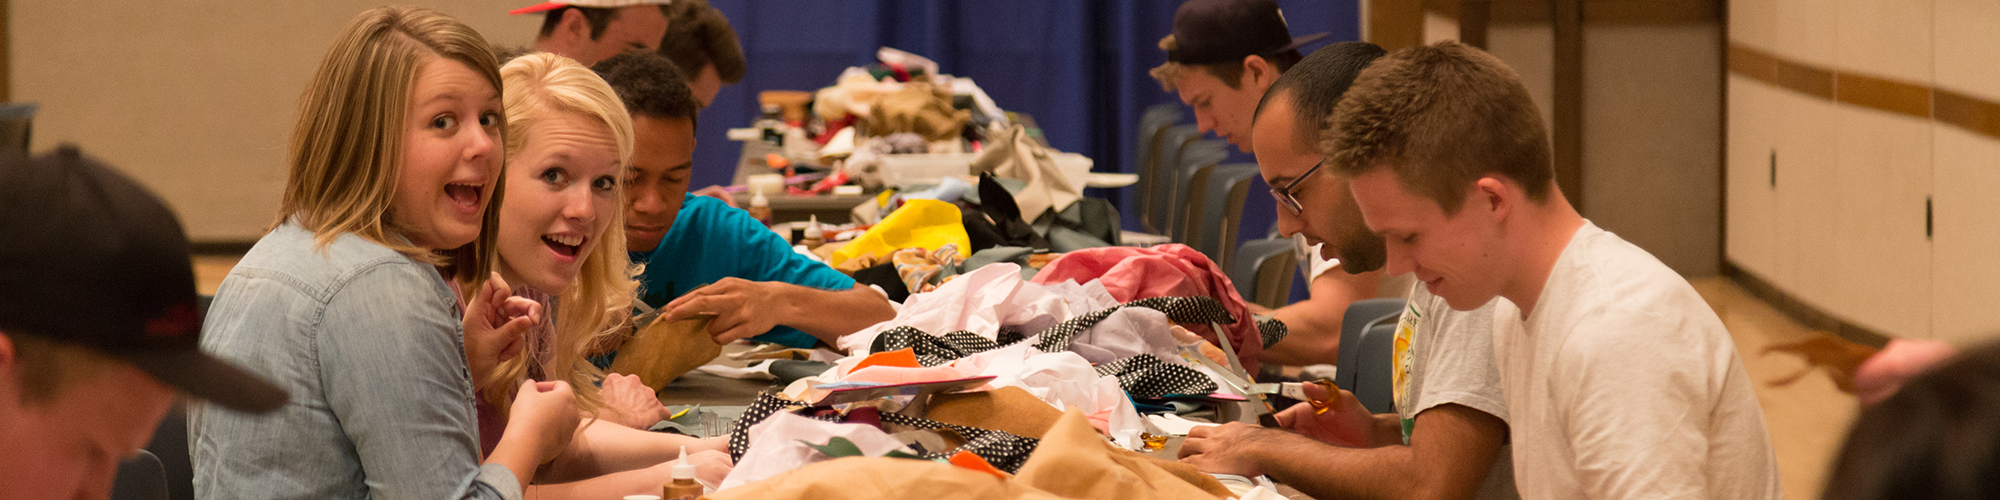 Students work at a table full of cloths